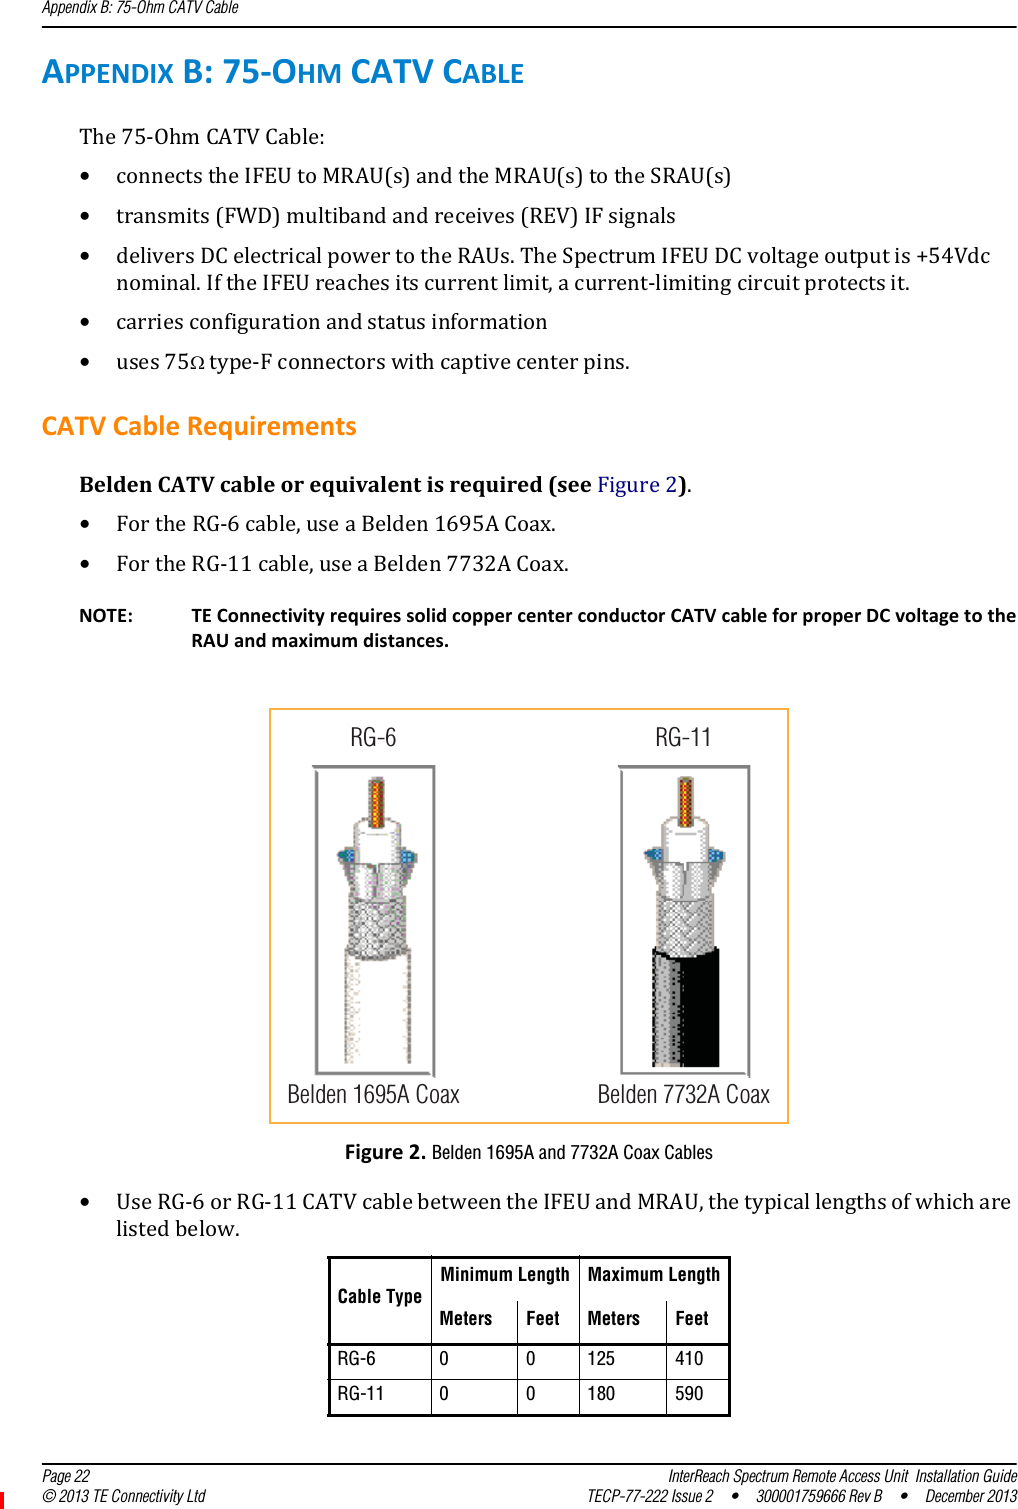 Appendix B: 75-Ohm CATV Cable  Page 22 InterReach Spectrum Remote Access Unit  Installation Guide© 2013 TE Connectivity Ltd TECP-77-222 Issue 2  •  300001759666 Rev B  •  December 2013APPENDIXB:75‐OHMCATVCABLEThe75‐OhmCATVCable:•connectstheIFEUtoMRAU(s)andtheMRAU(s)totheSRAU(s)•transmits(FWD)multibandandreceives(REV)IFsignals•deliversDCelectricalpowertotheRAUs.TheSpectrumIFEUDCvoltageoutputis+54Vdcnominal.IftheIFEUreachesitscurrentlimit,acurrent‐limitingcircuitprotectsit.•carriesconfigurationandstatusinformation•uses75type‐Fconnectorswithcaptivecenterpins.CATVCableRequirementsBeldenCATVcableorequivalentisrequired(seeFigure2).•FortheRG‐6cable,useaBelden1695ACoax.•FortheRG‐11cable,useaBelden7732ACoax.NOTE: TEConnectivityrequiressolidcoppercenterconductorCATVcableforproperDCvoltagetotheRAUandmaximumdistances.Figure2.Belden 1695A and 7732A Coax Cables•UseRG‐6orRG‐11CATVcablebetweentheIFEUandMRAU,thetypicallengthsofwhicharelistedbelow.Cable TypeMinimum Length Maximum LengthMeters Feet Meters FeetRG-6 0 0 125 410RG-11 0 0 180 590RG-11Belden 1695A CoaxRG-6Belden 7732A Coax